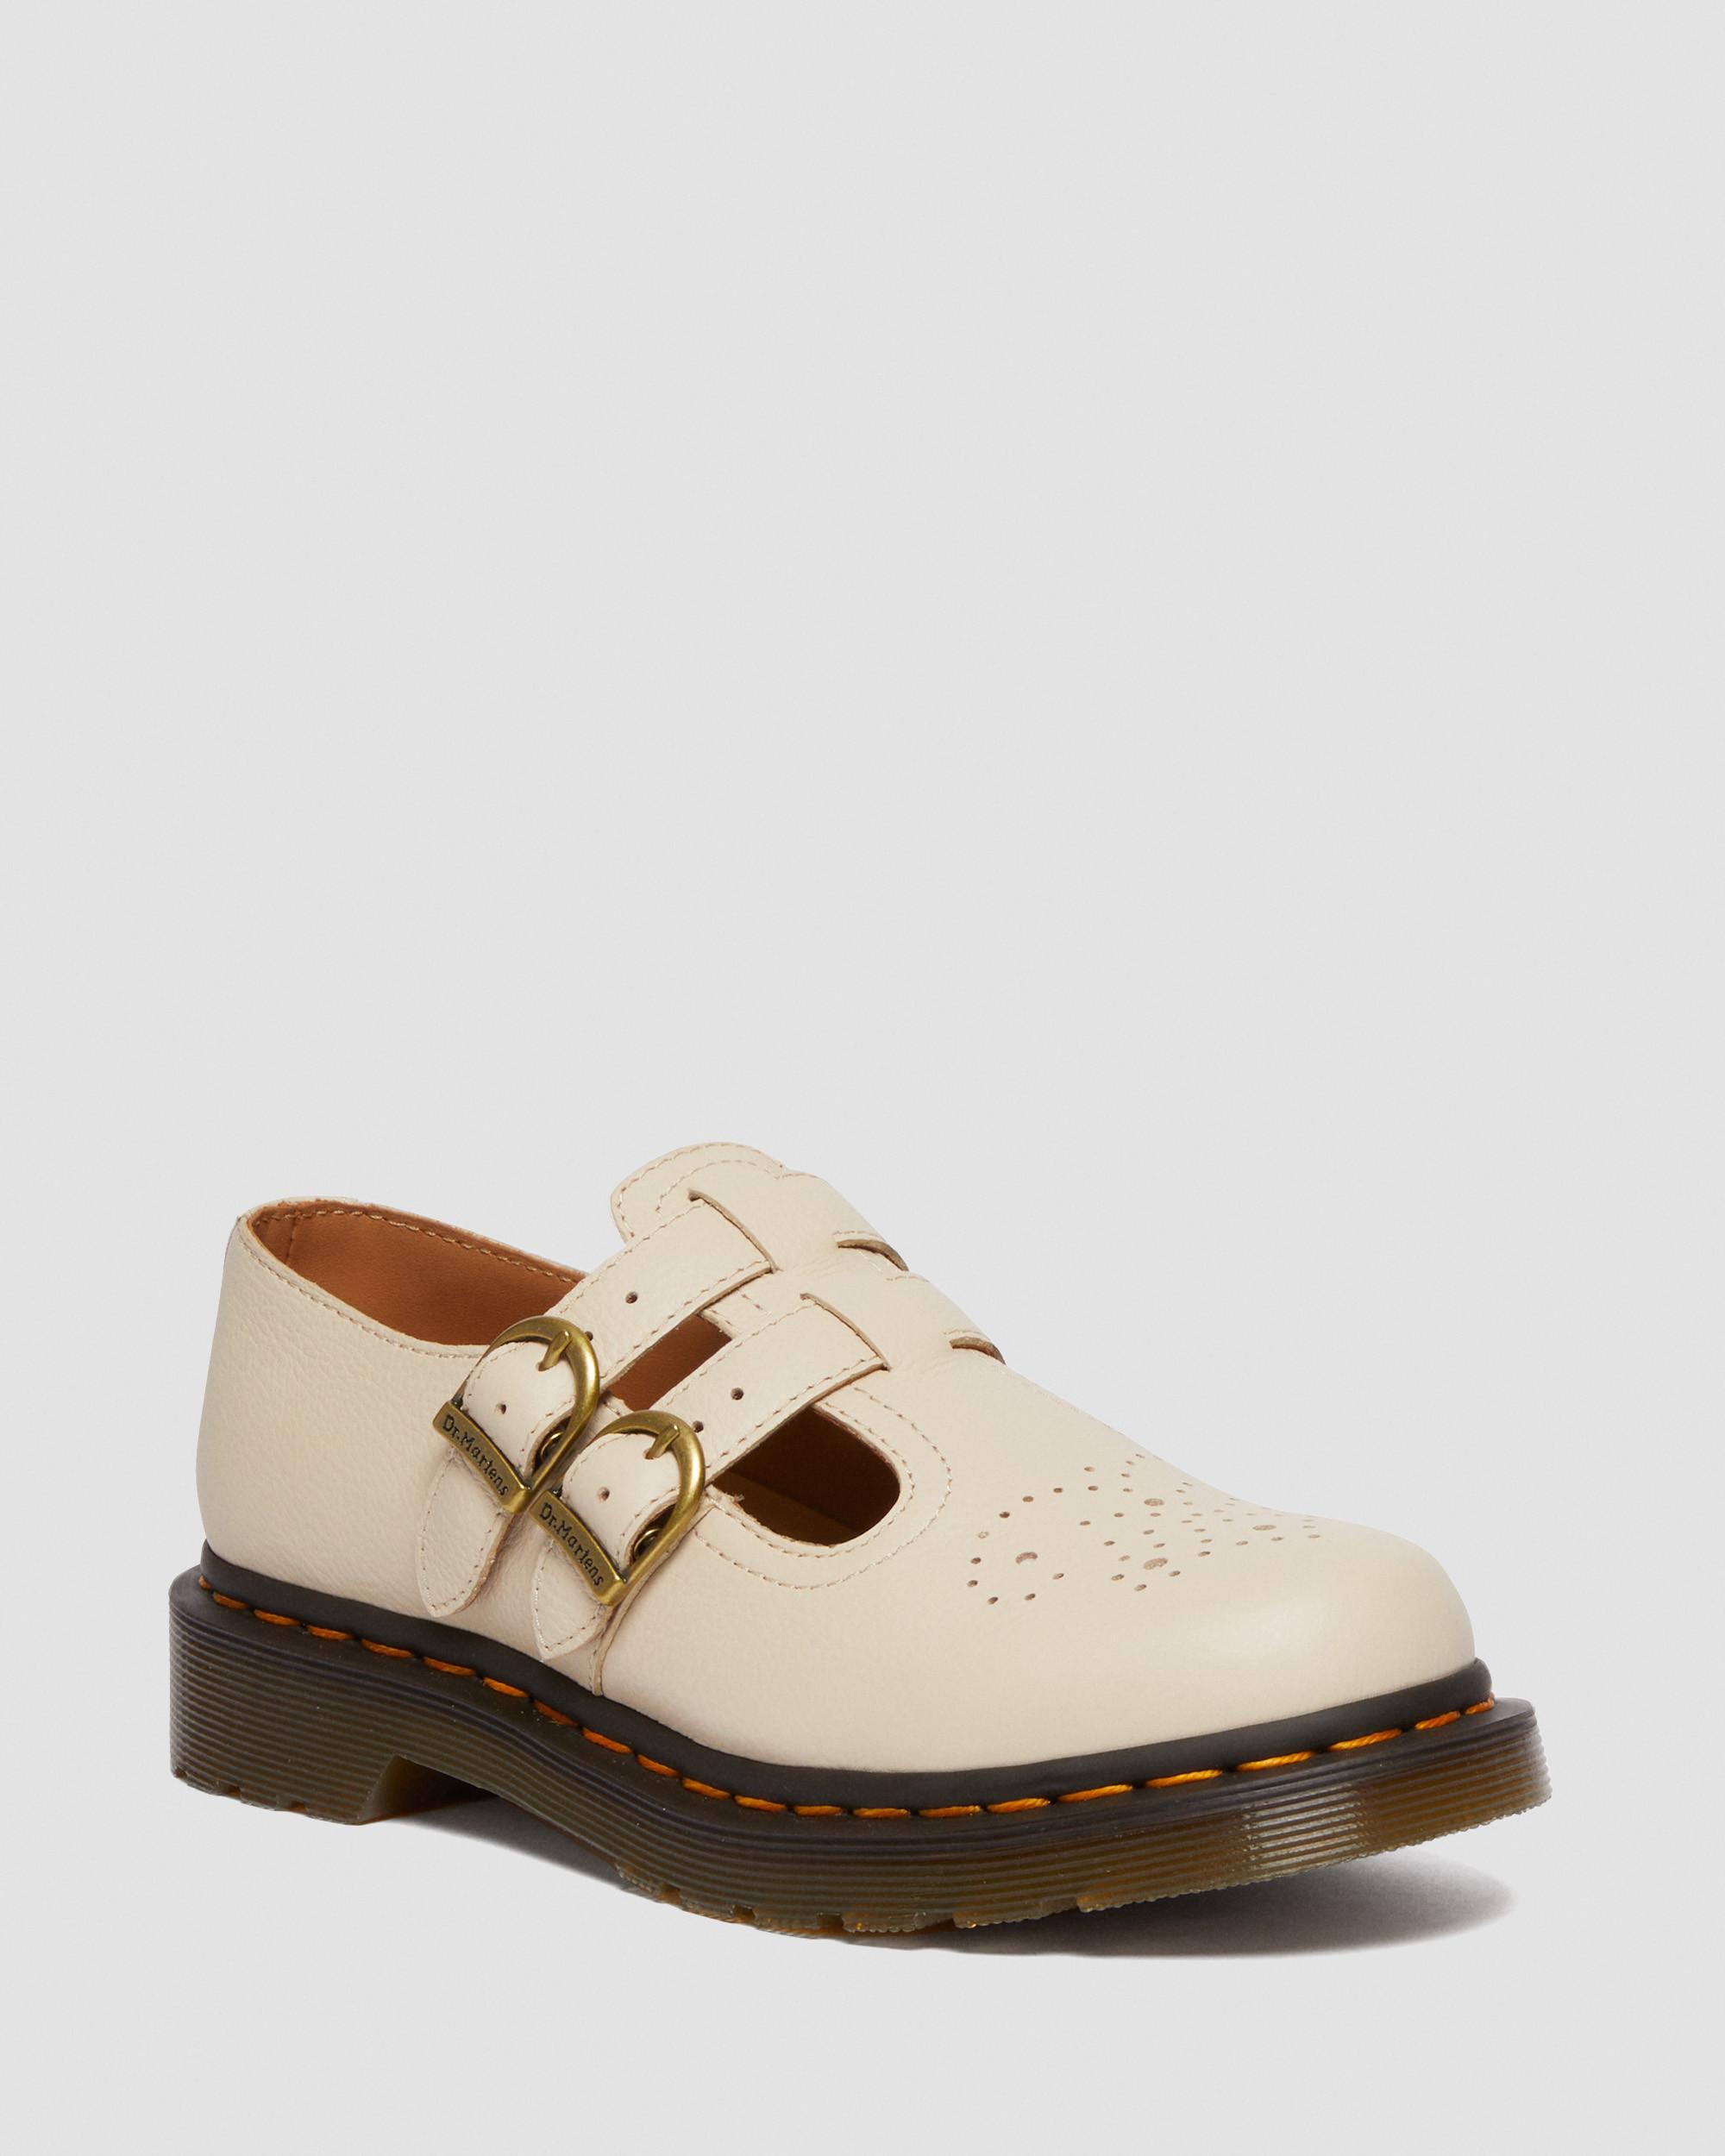 8065 Virginia Leather Mary Jane Shoes | Dr. Martens